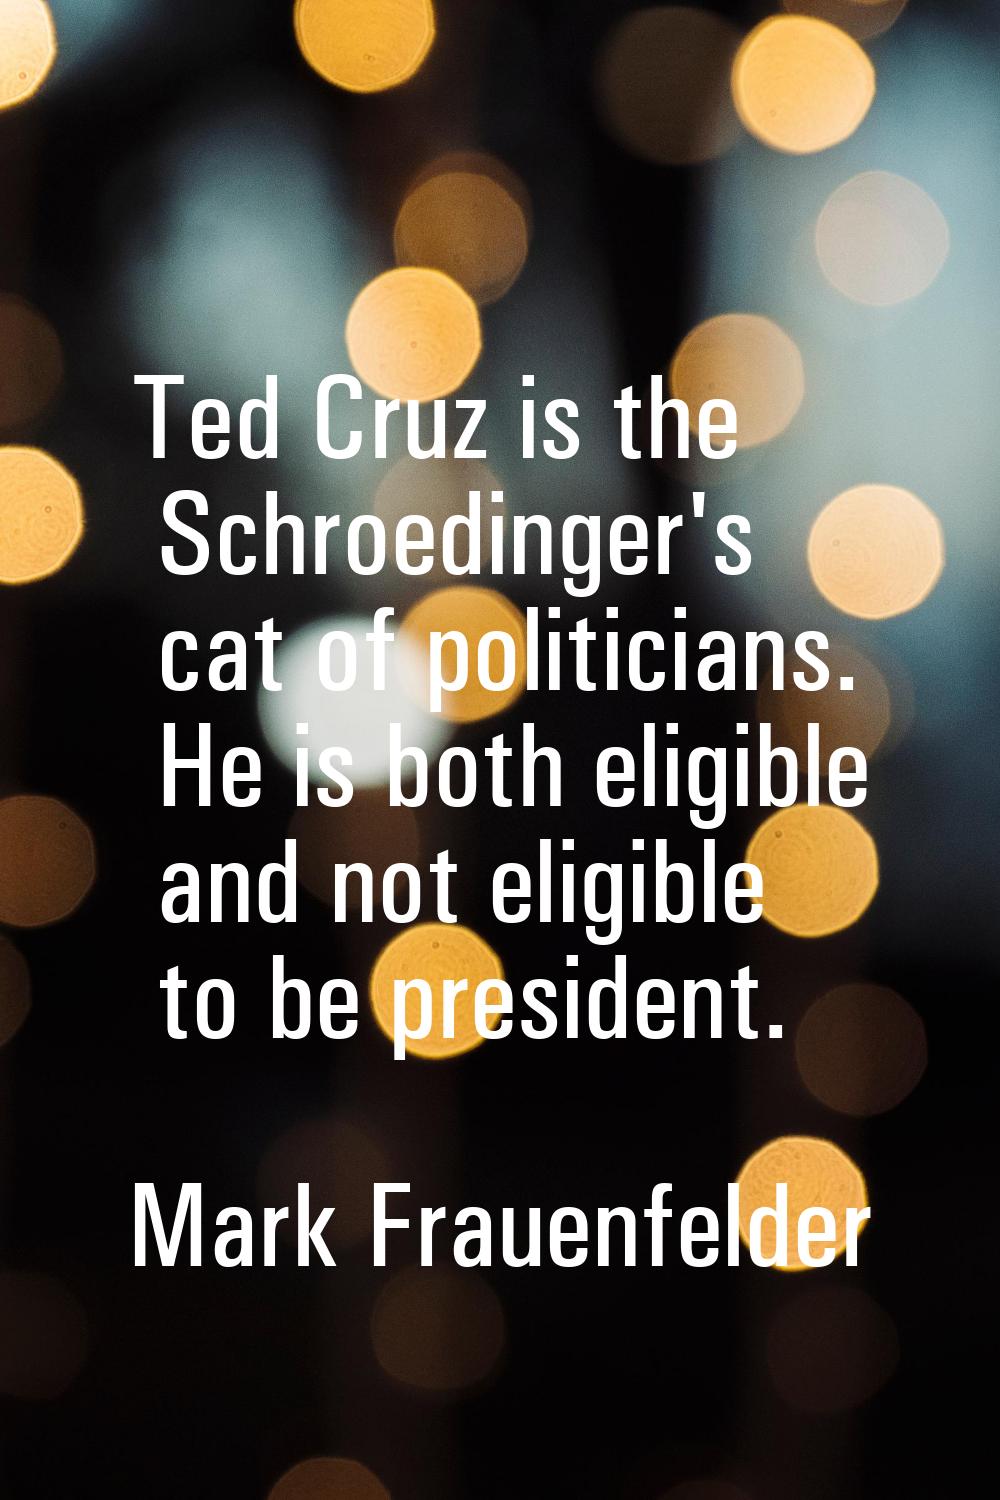 Ted Cruz is the Schroedinger's cat of politicians. He is both eligible and not eligible to be presi